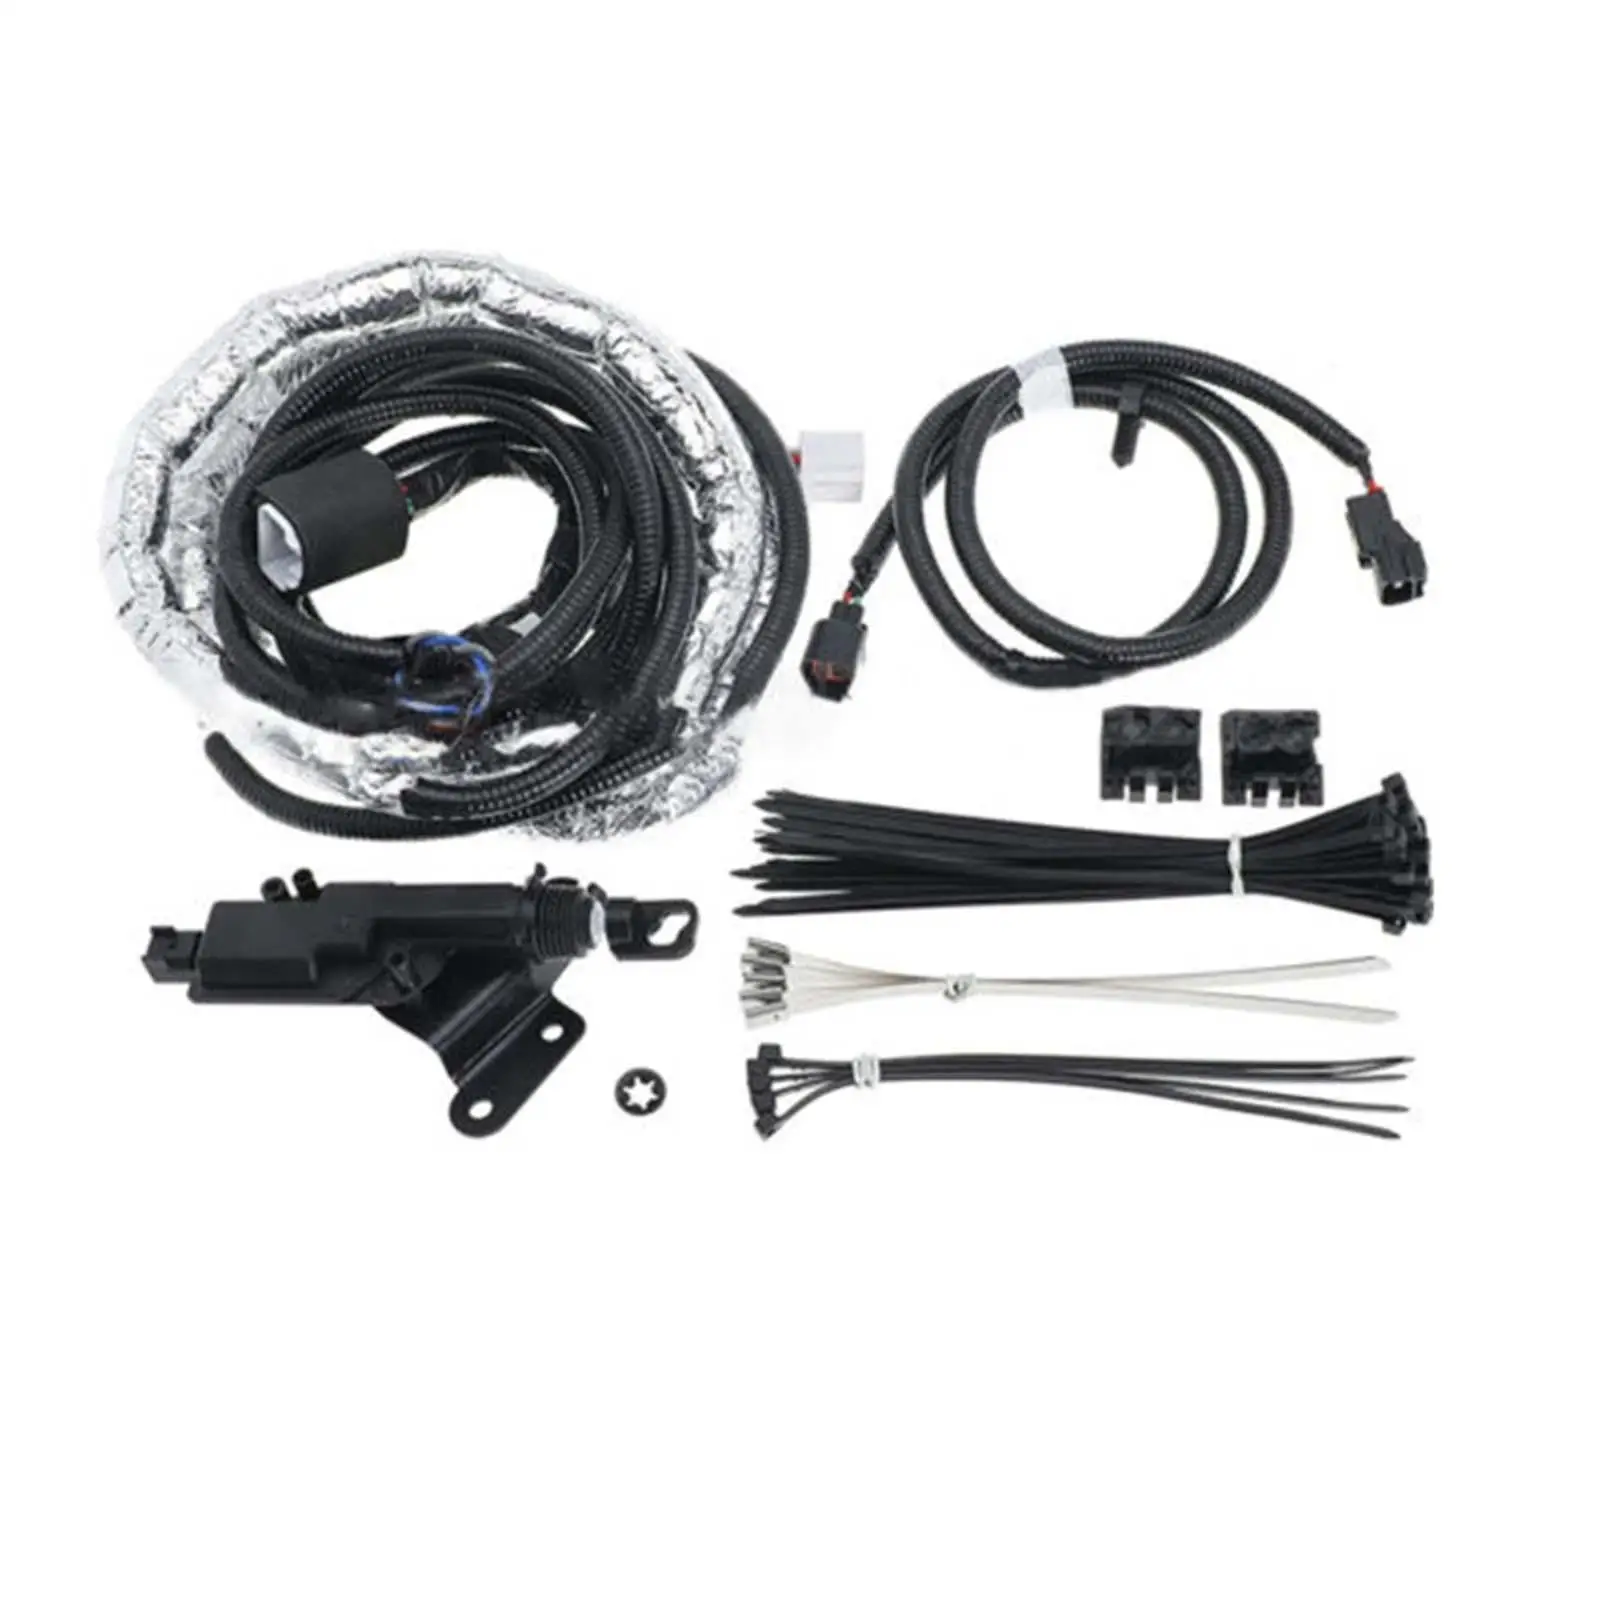 Power Tailgate Lock Kit Spare Parts Black Accessories for Tacoma